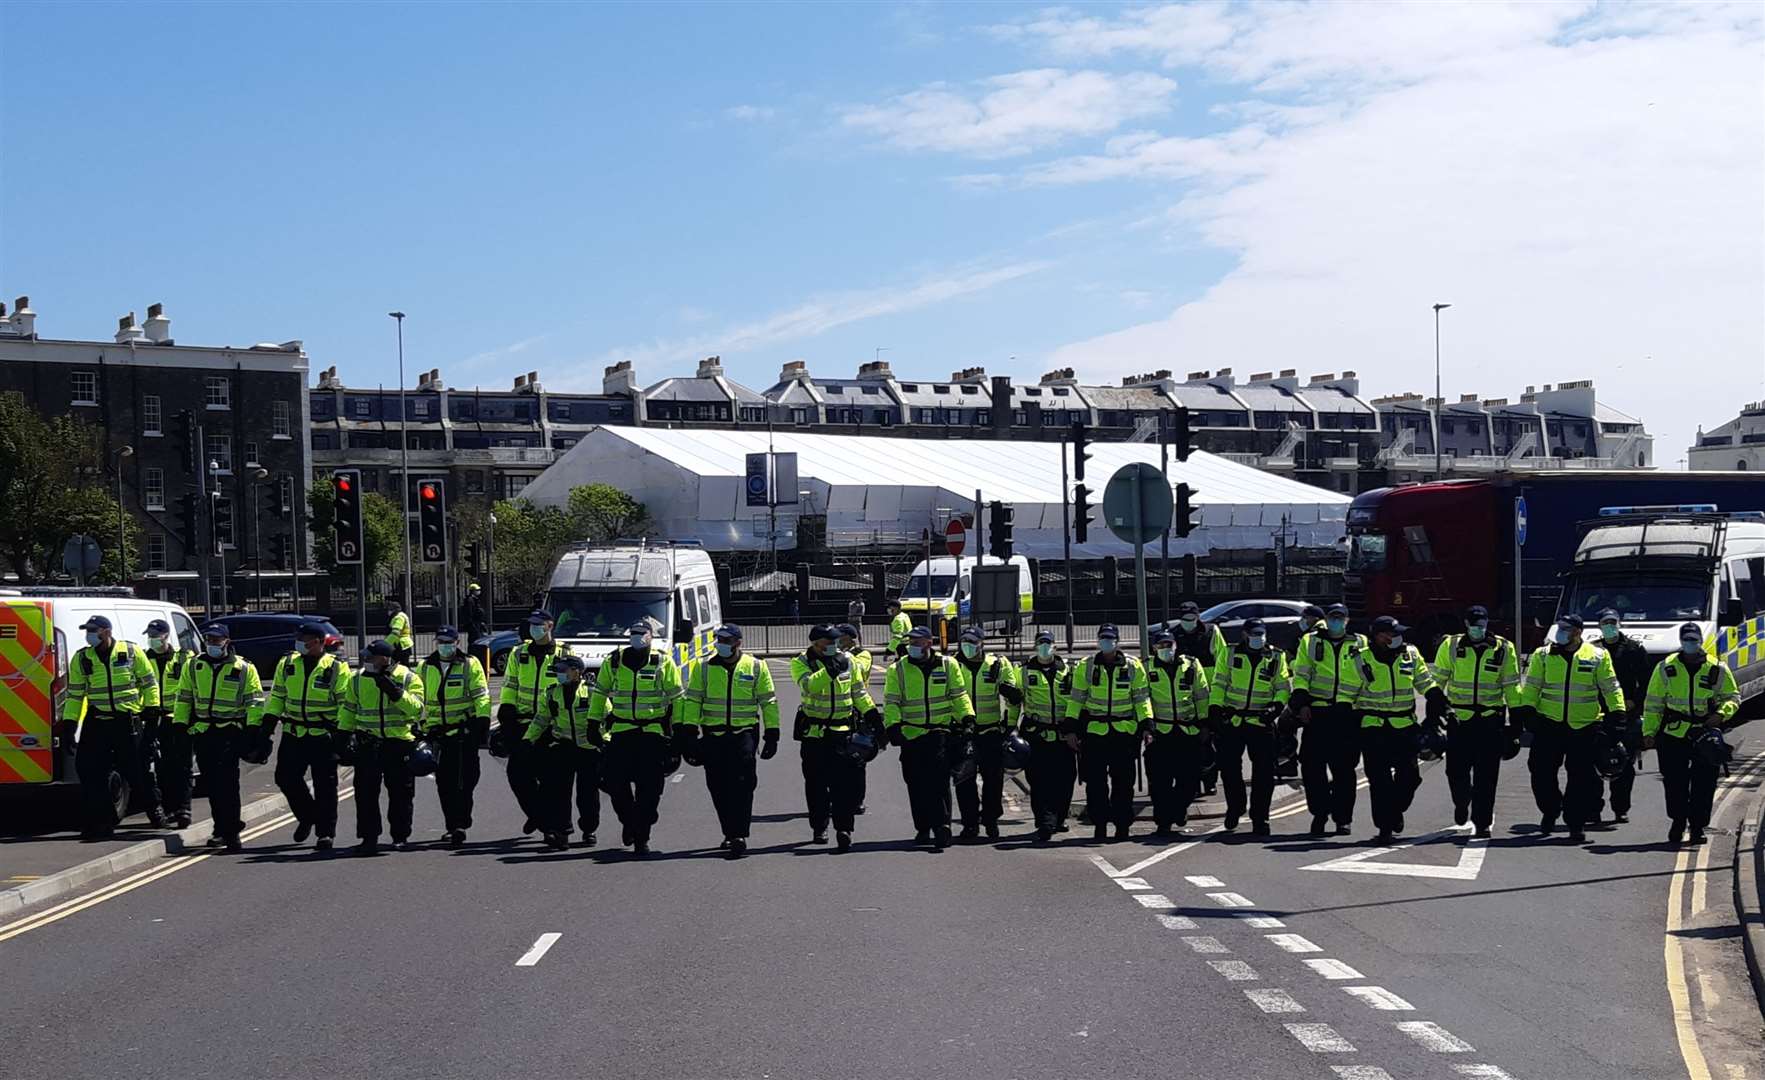 A wall of police push up along York Street during the protest Picture: Sam Lennon